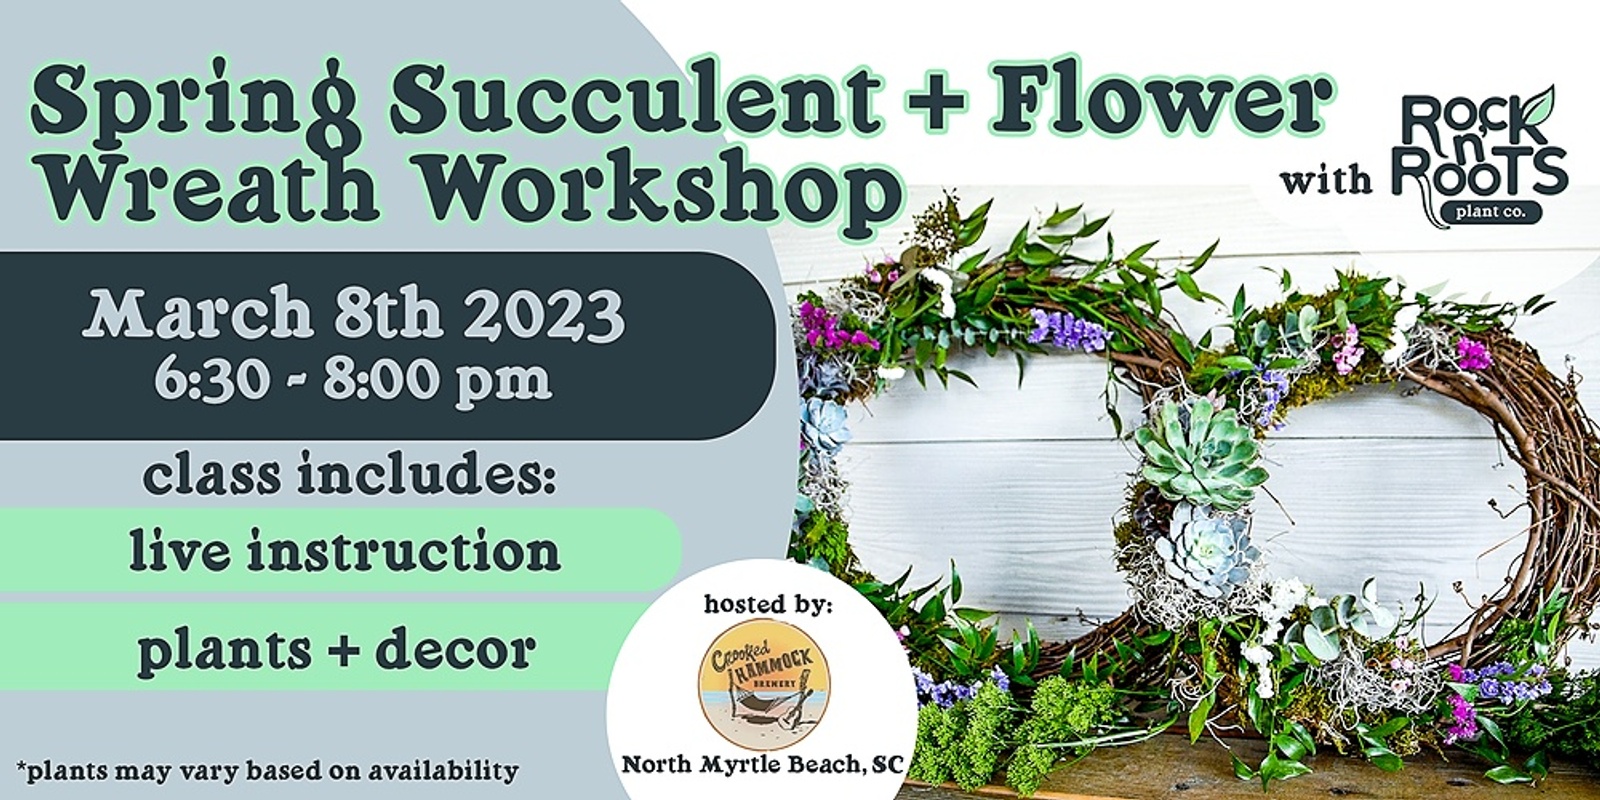 Banner image for Spring Succulent + Flower Wreath Workshop at Crooked Hammock Brewery (North Myrtle Beach, SC)